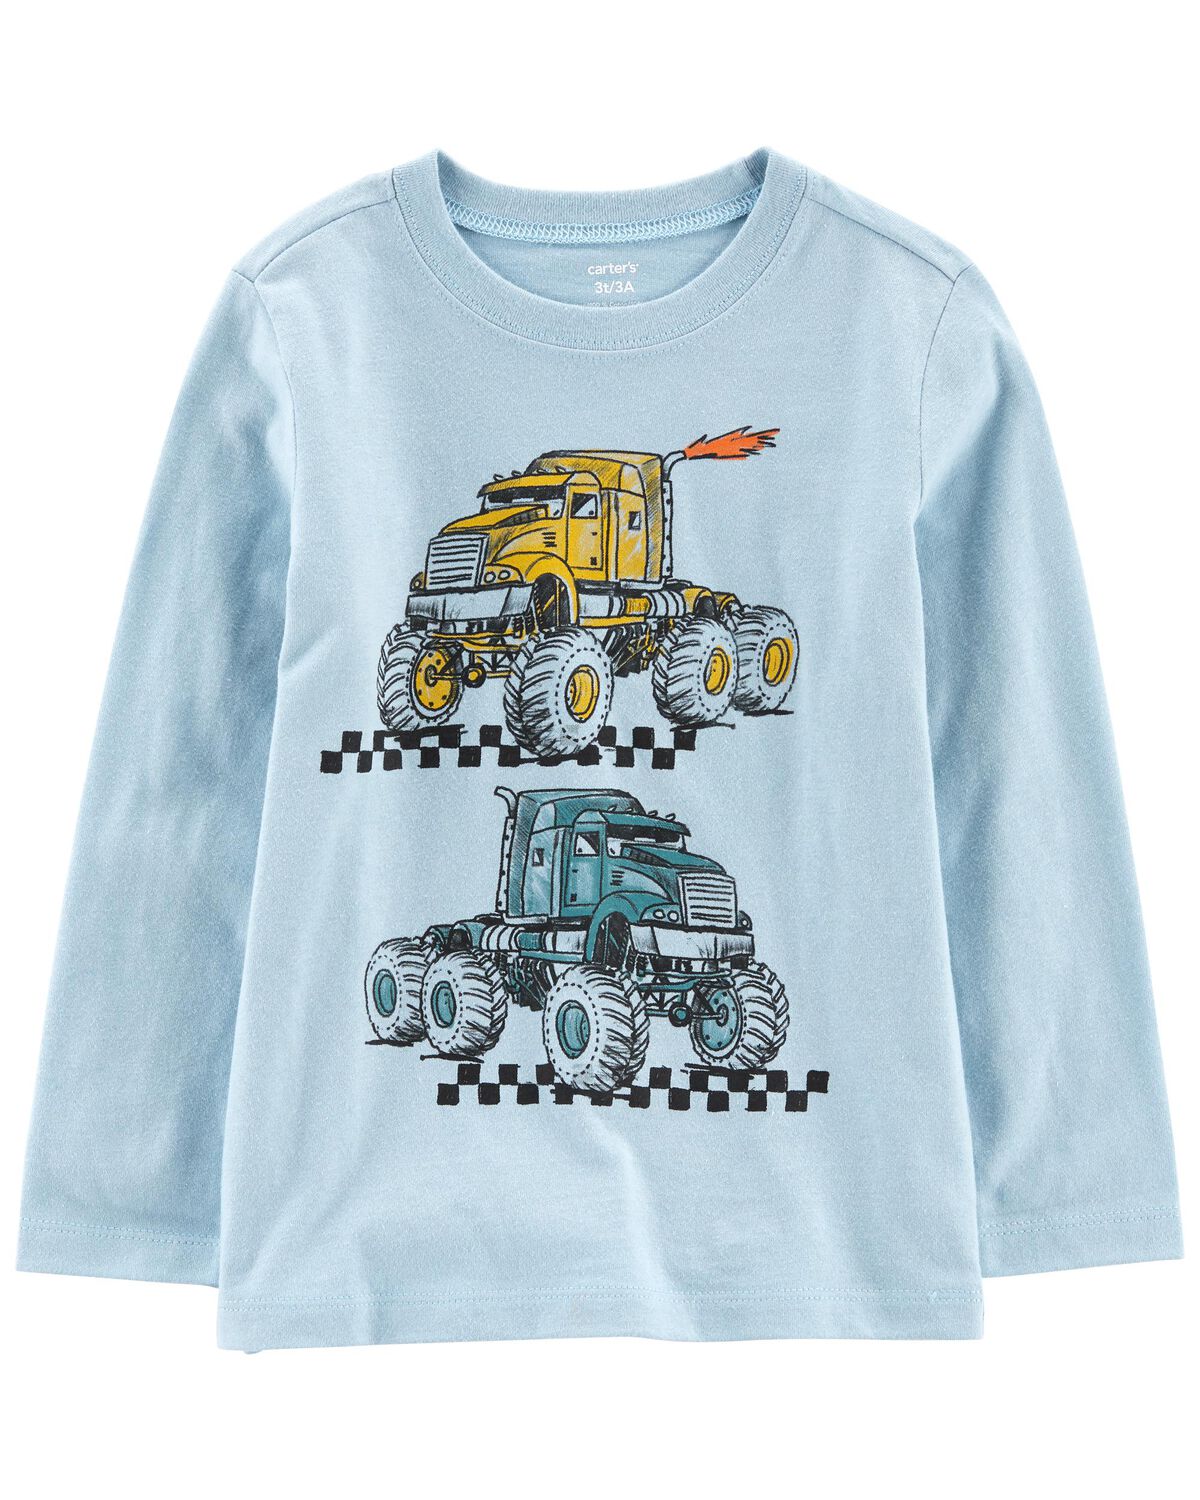 Blue Toddler Monster Truck Graphic Tee | carters.com